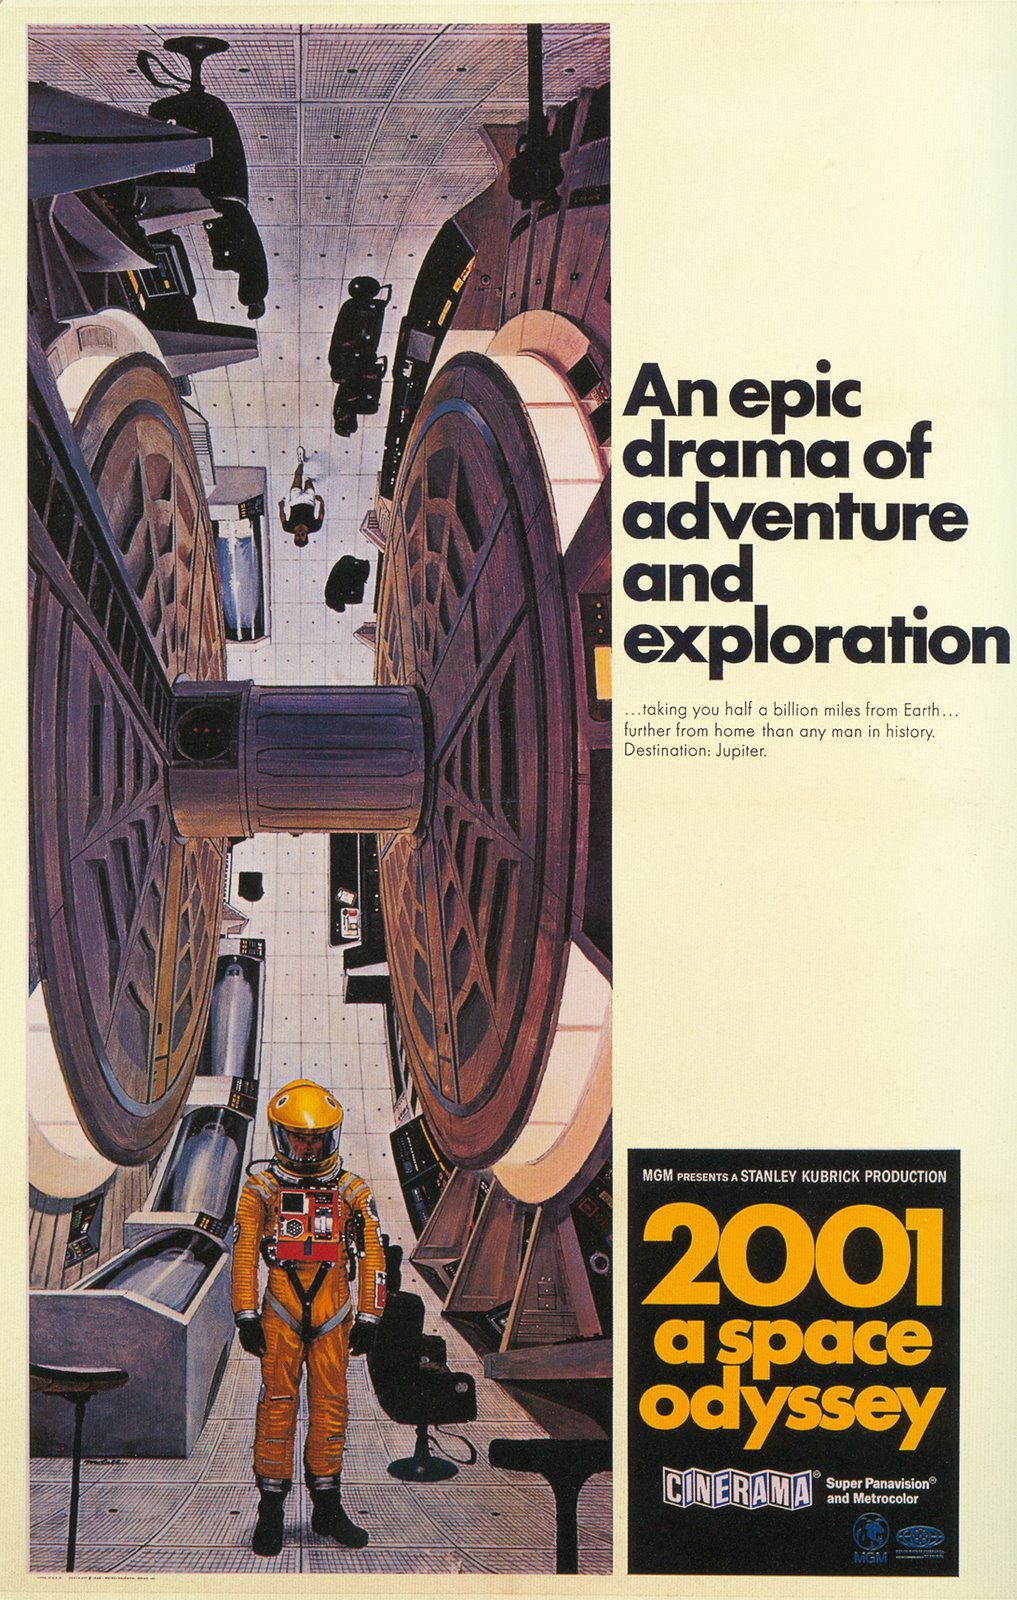 music from 2001 space odyssey